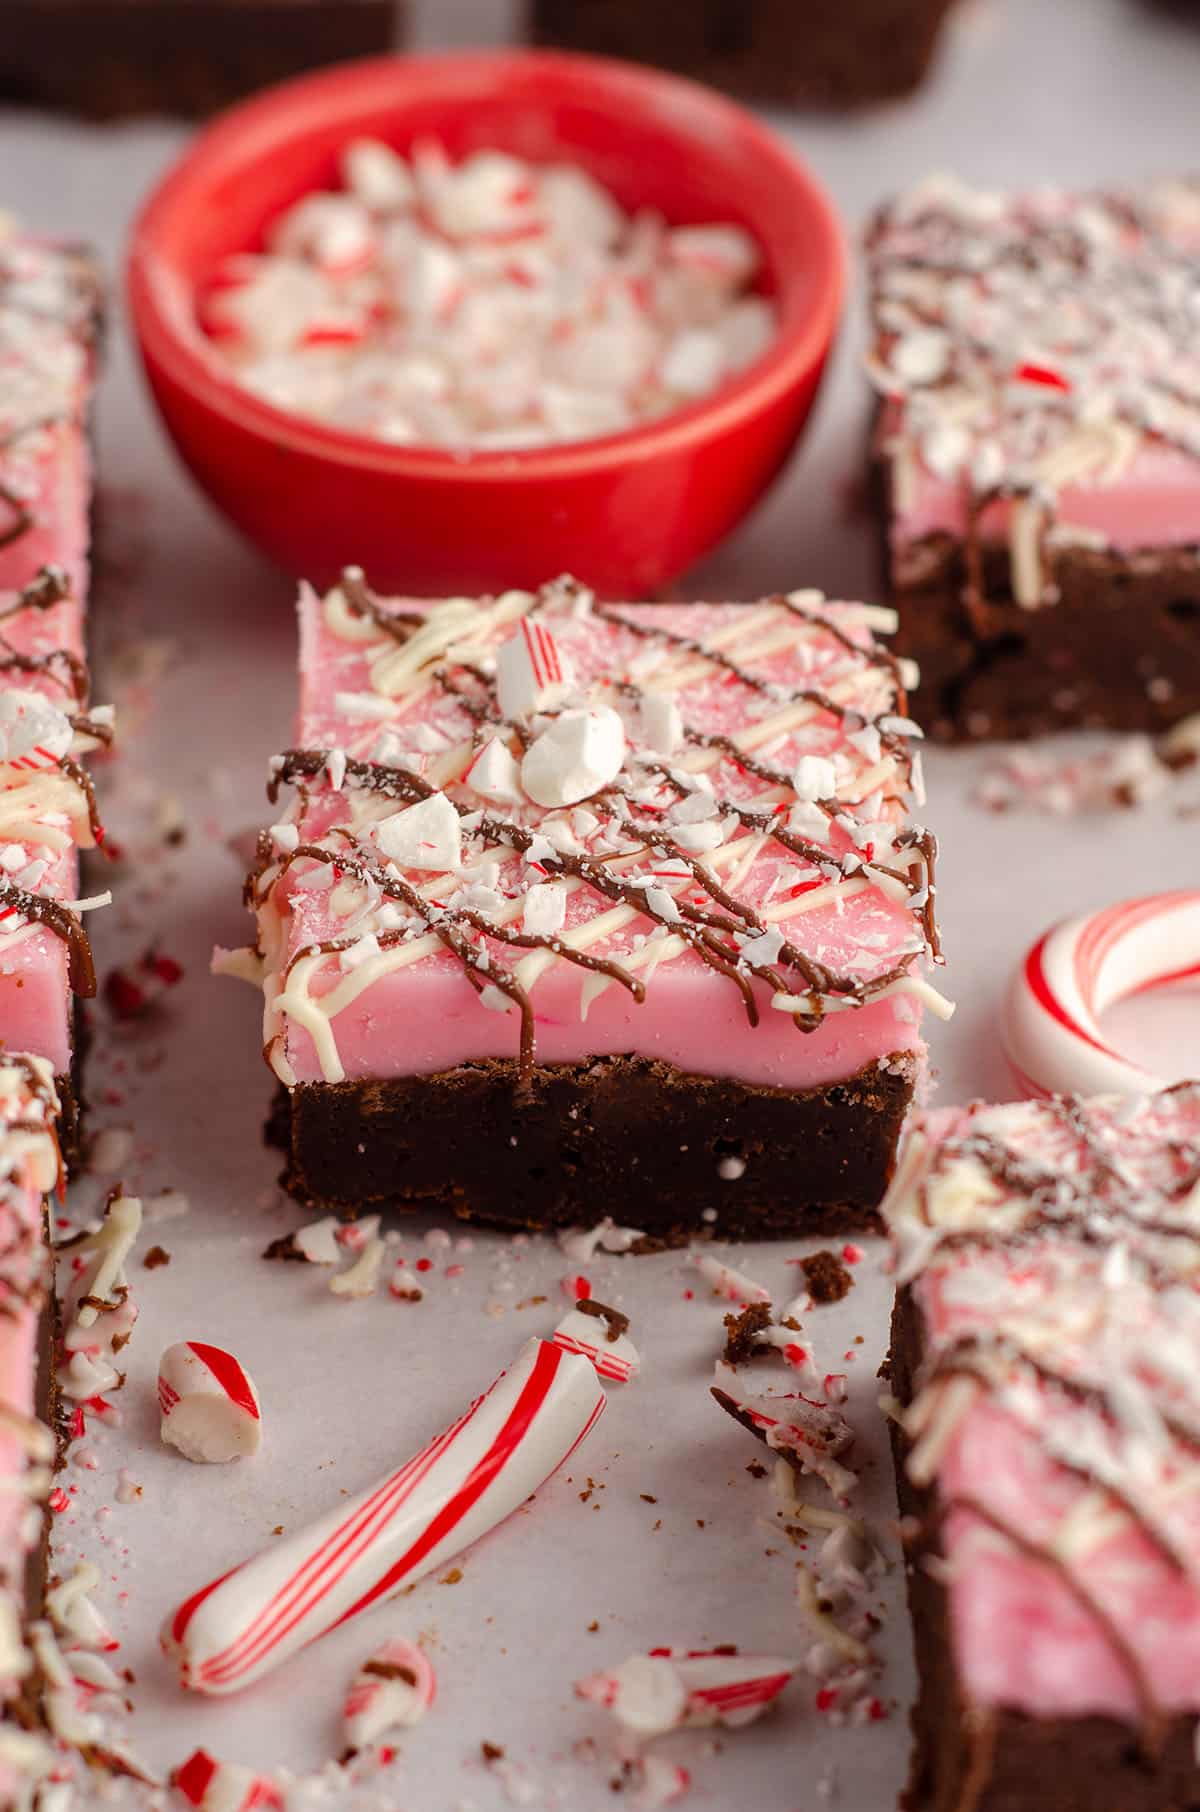 peppermint brownie sitting in front of a red prep bowl filled with crushed candy canes